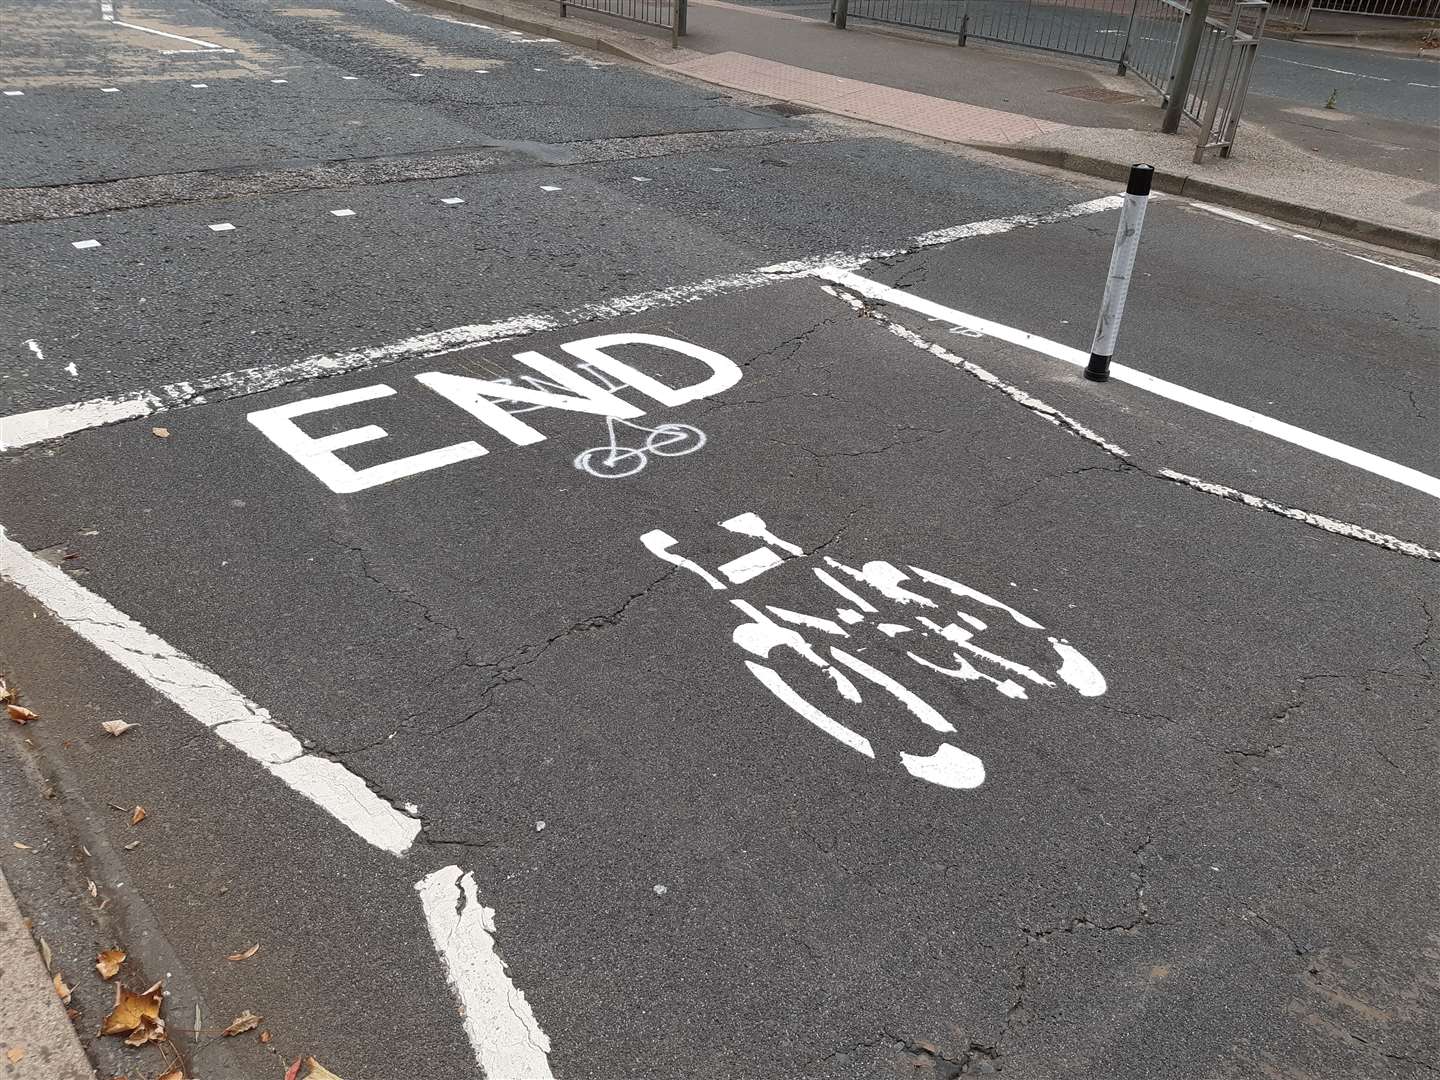 The cycle lane trial in Ashford was due to run for up to 18 months, but has already ended